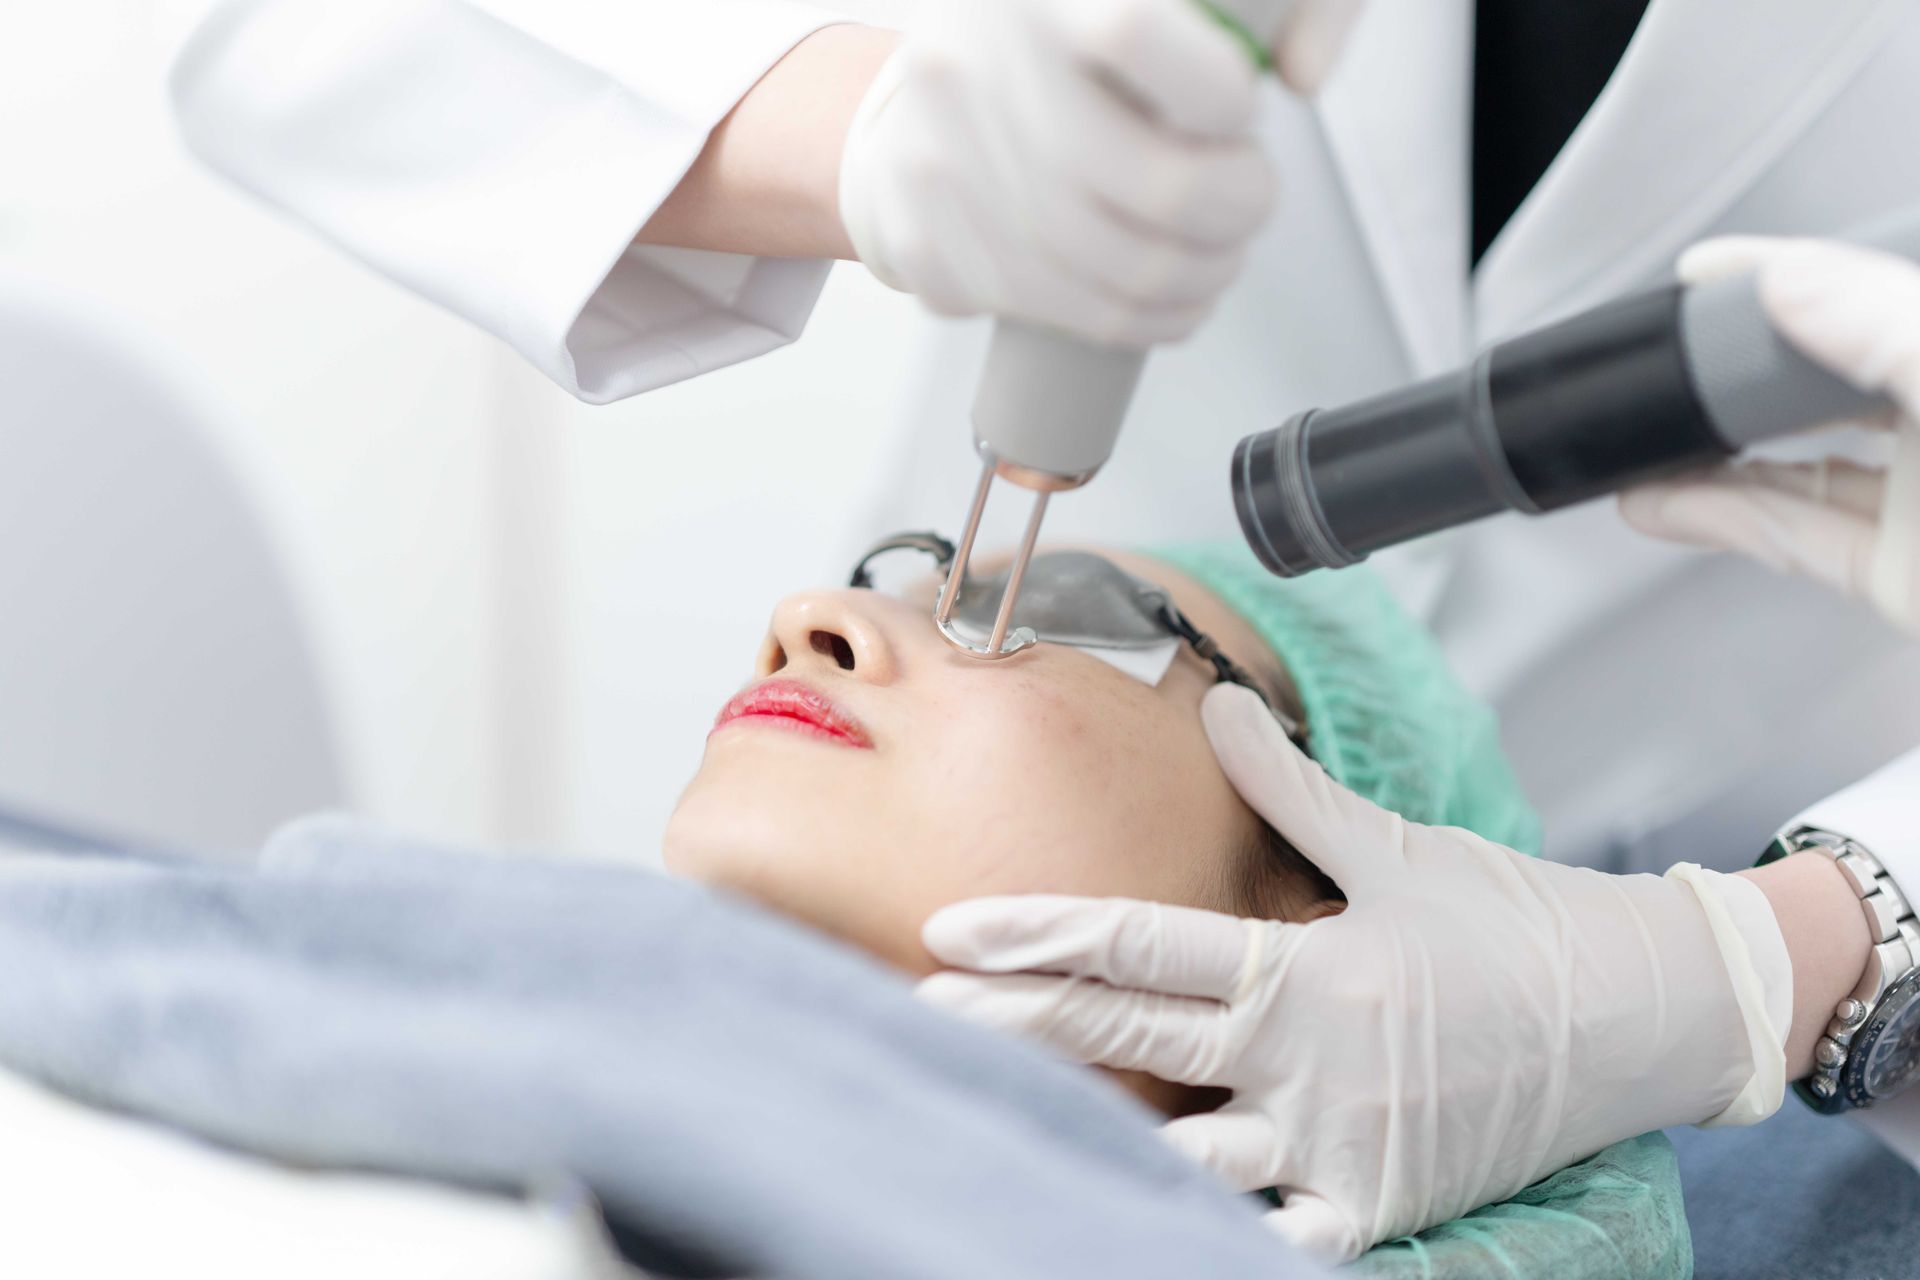 A woman is getting a laser treatment on her face